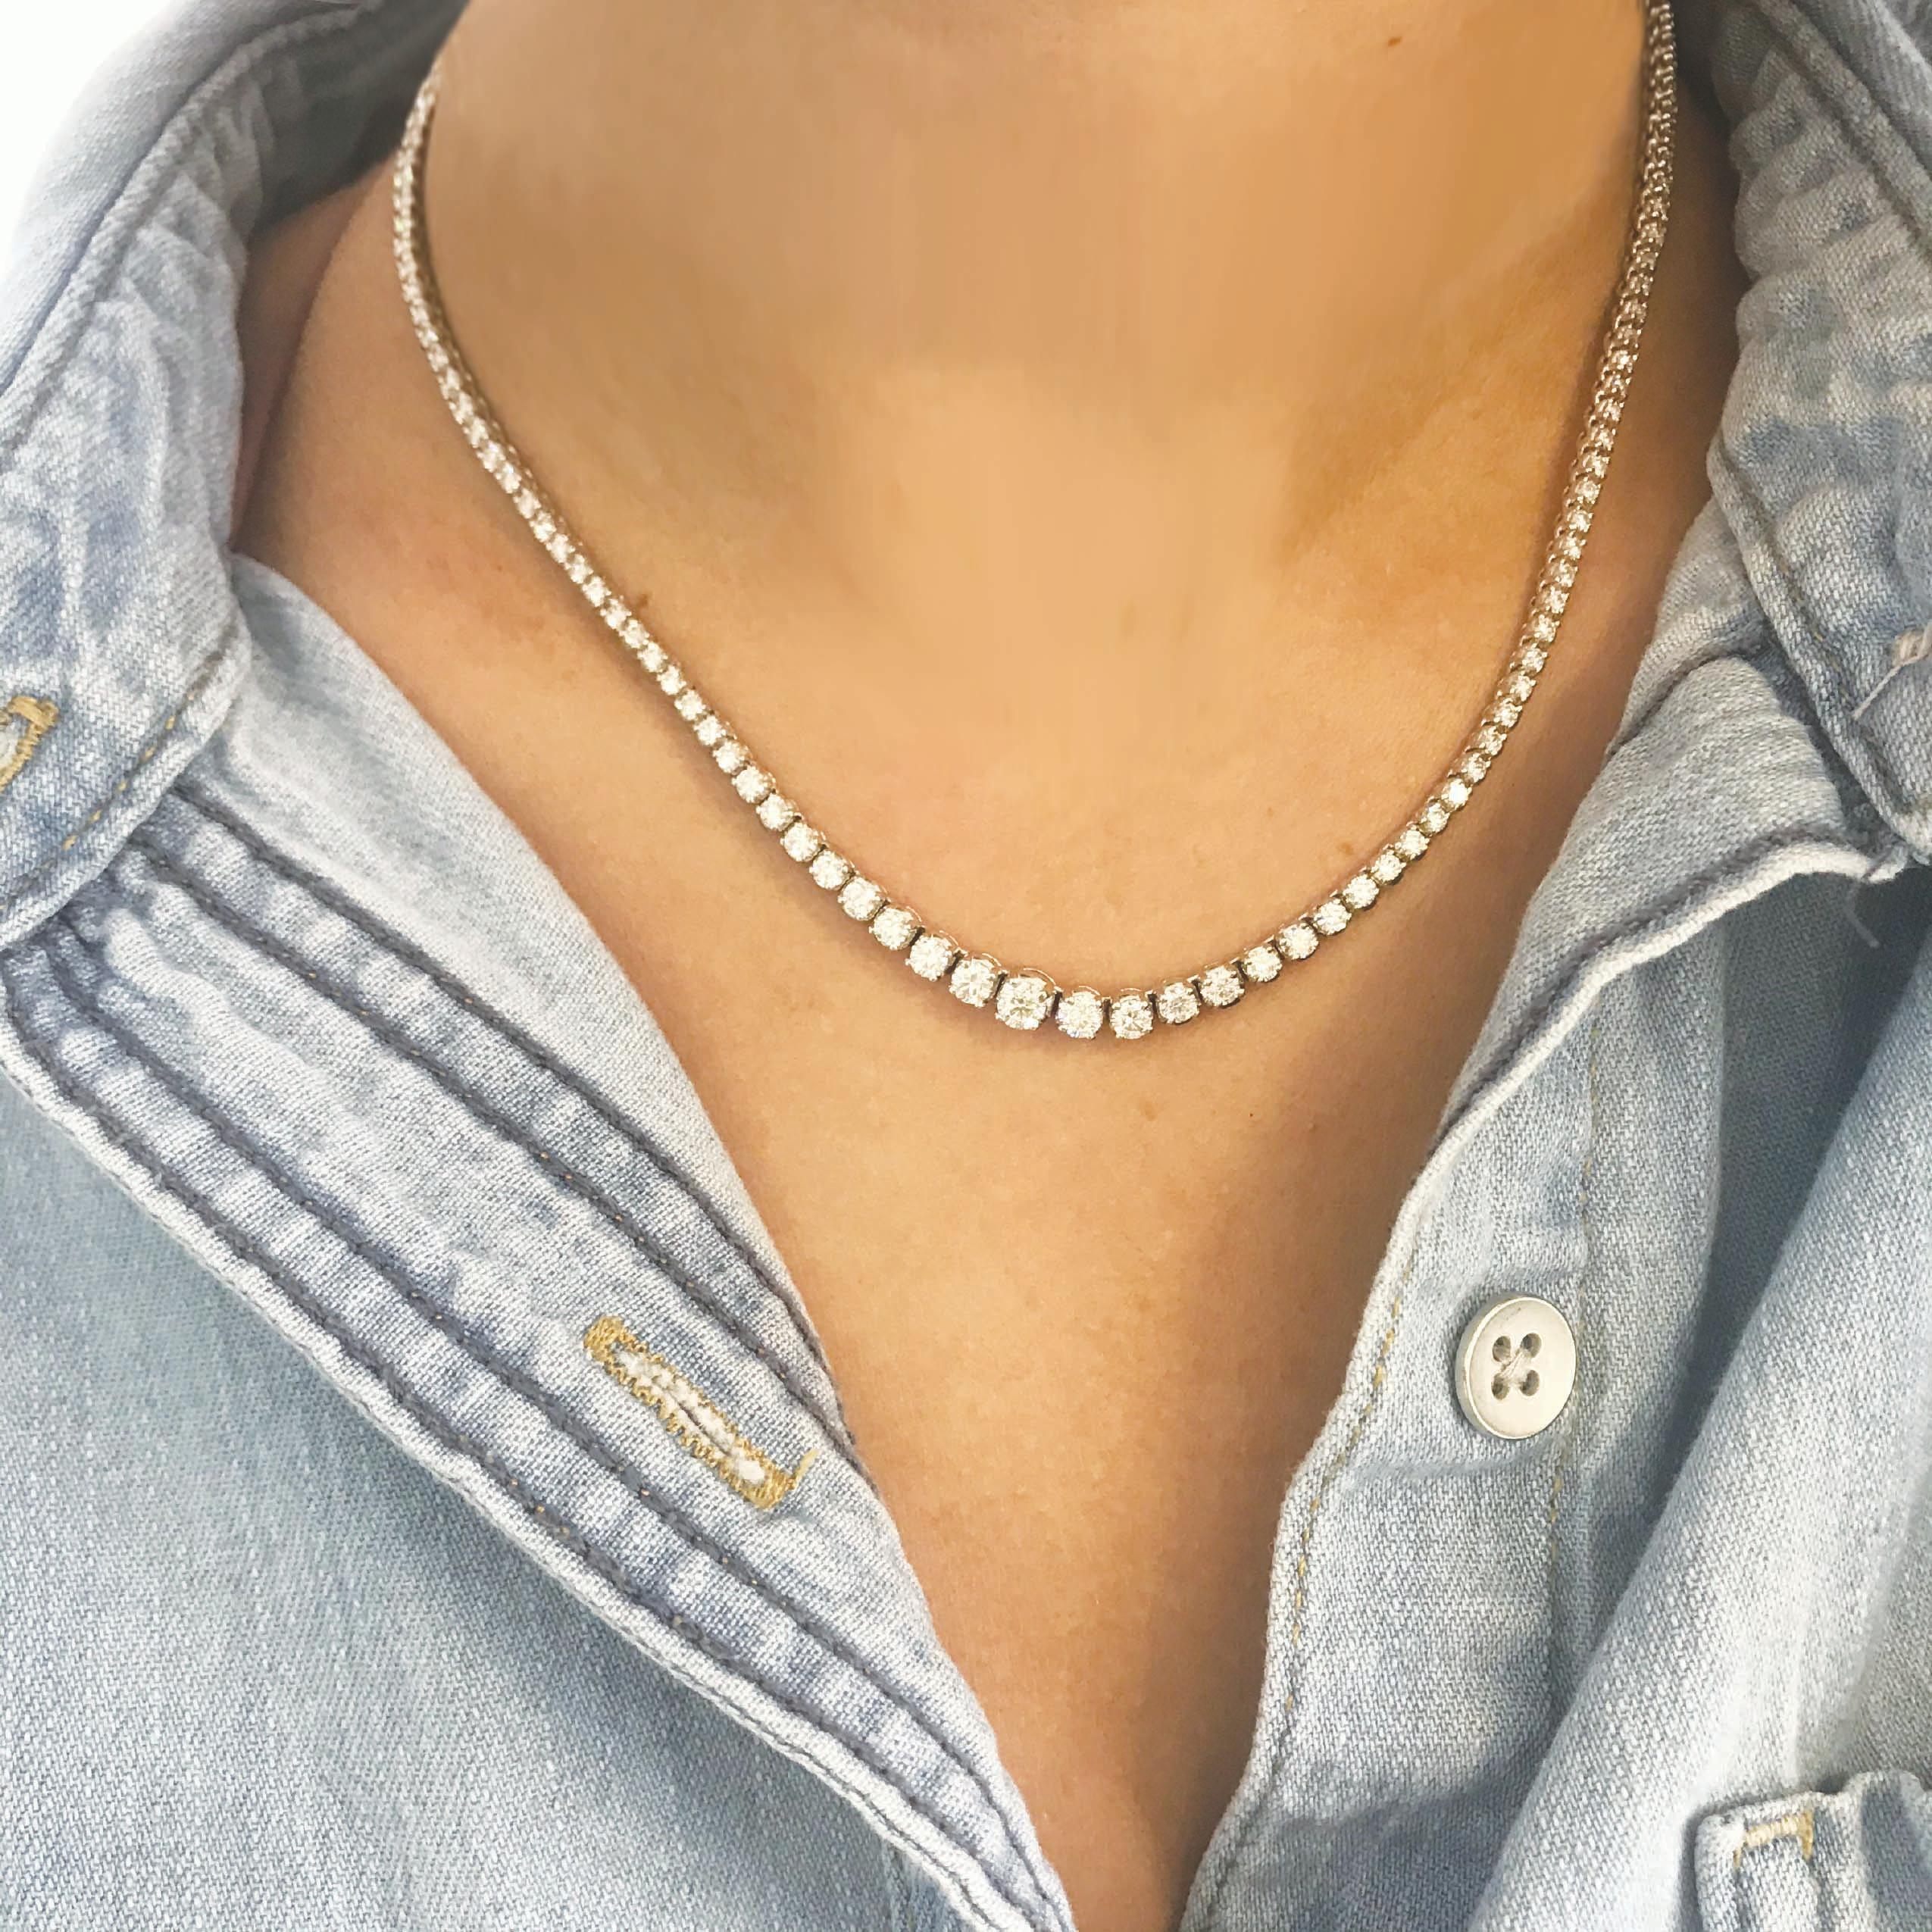 Diamond tennis necklaces are a classic fine jewelry staple in every women's dream accessory collection! They are so stunning and go with everything! The diamond necklace has OVER 100 DIAMONDS! This diamond necklace is made with natural, high